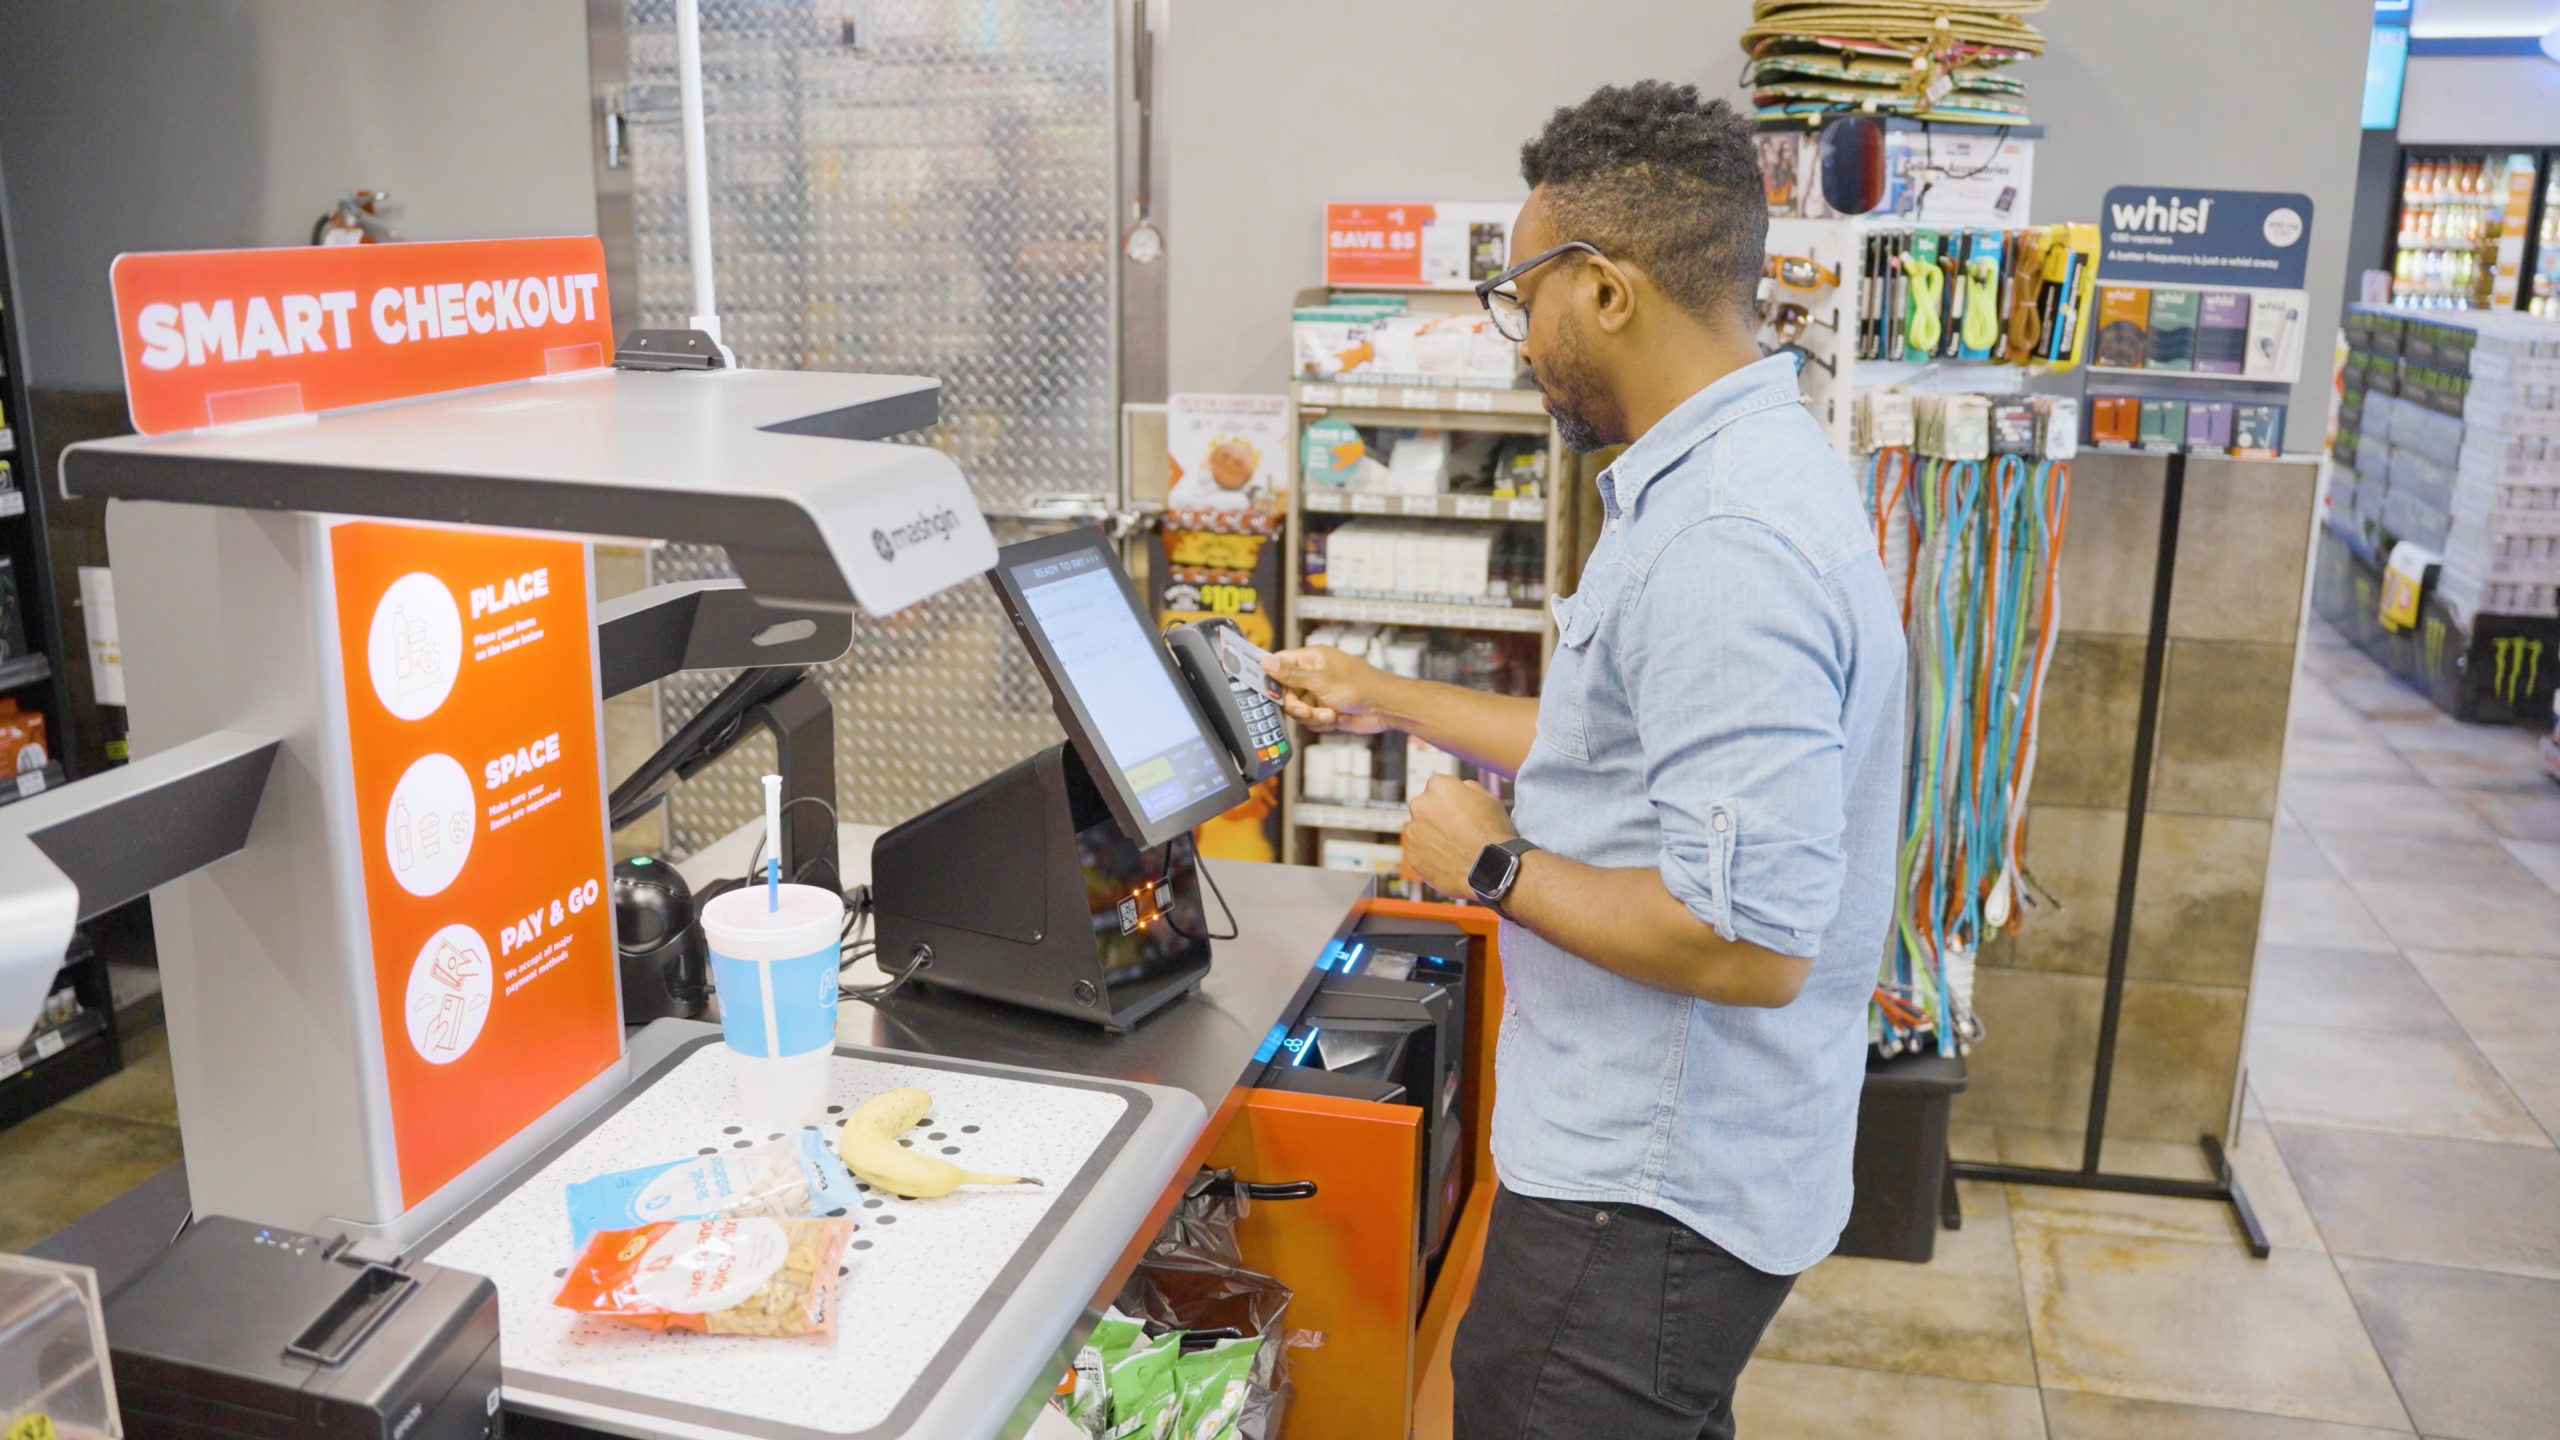 Couche-Tard to deploy AI-powered ‘Smart Checkout’ in over 7000 stores